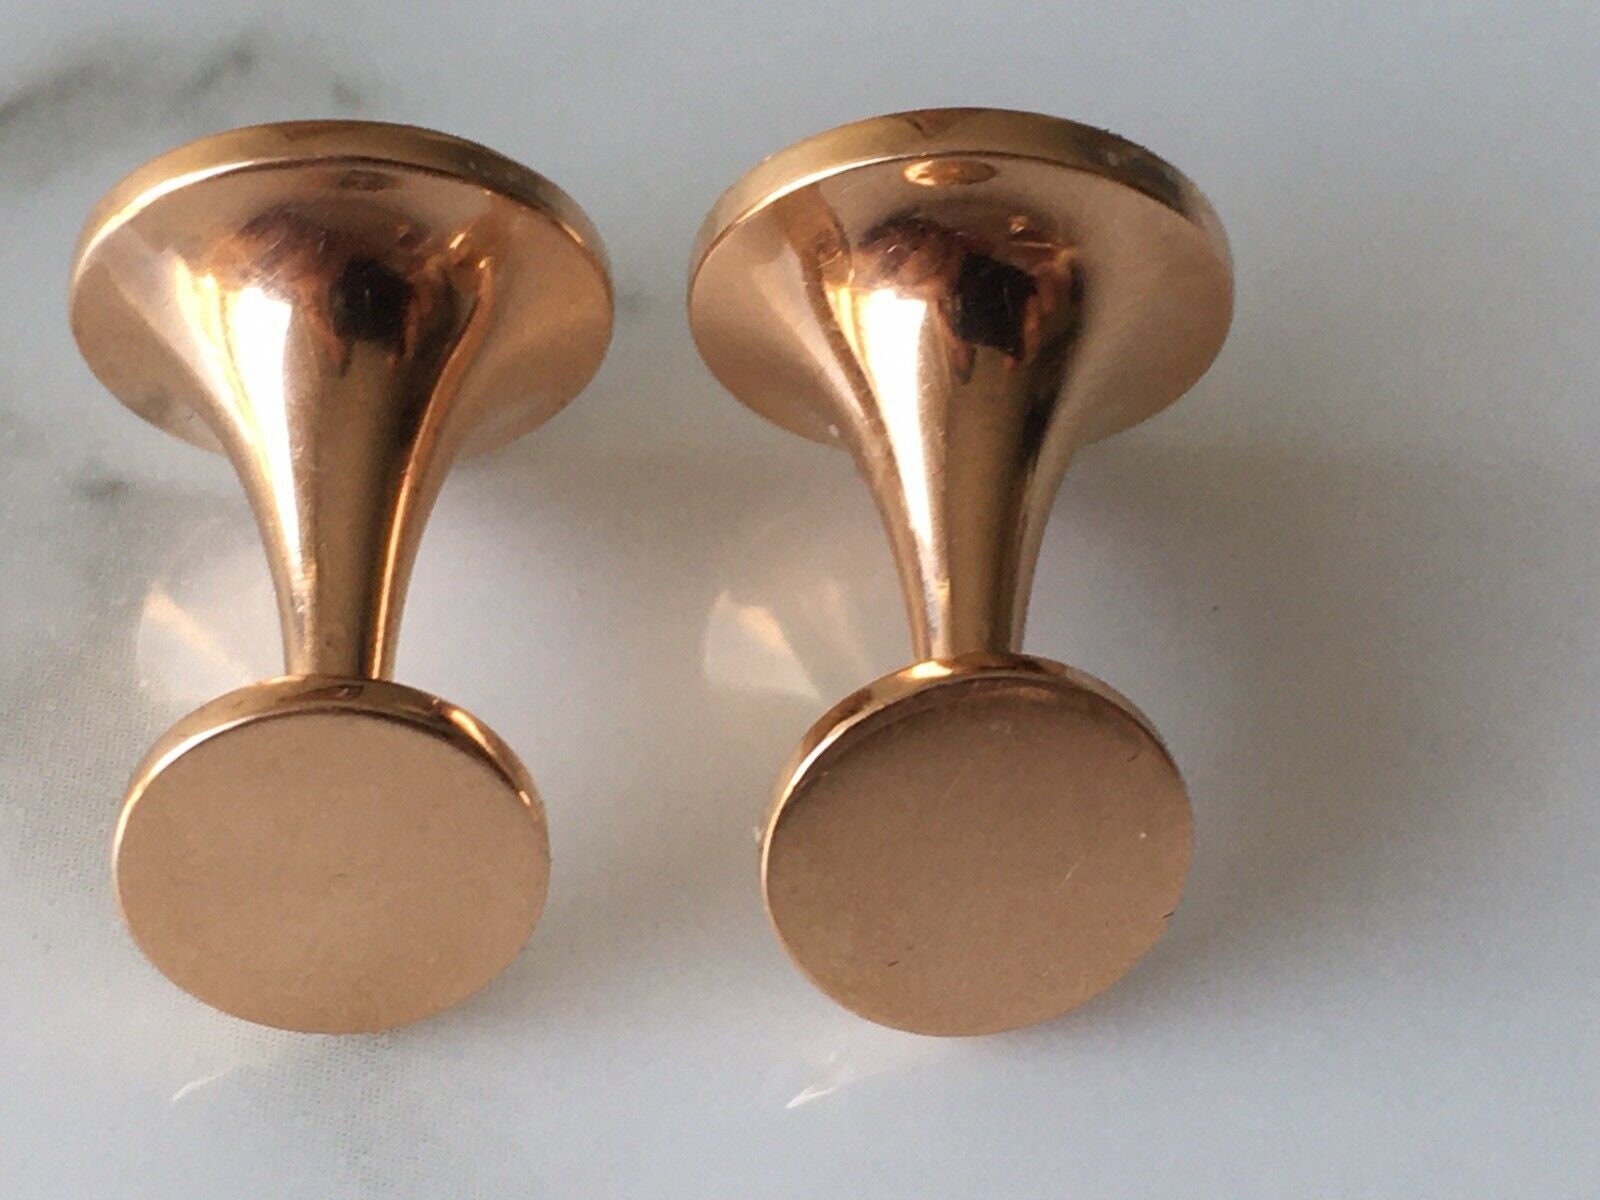 18k Rose Gold 750 and diamond cufflinks made in Italy. Amazing design quality